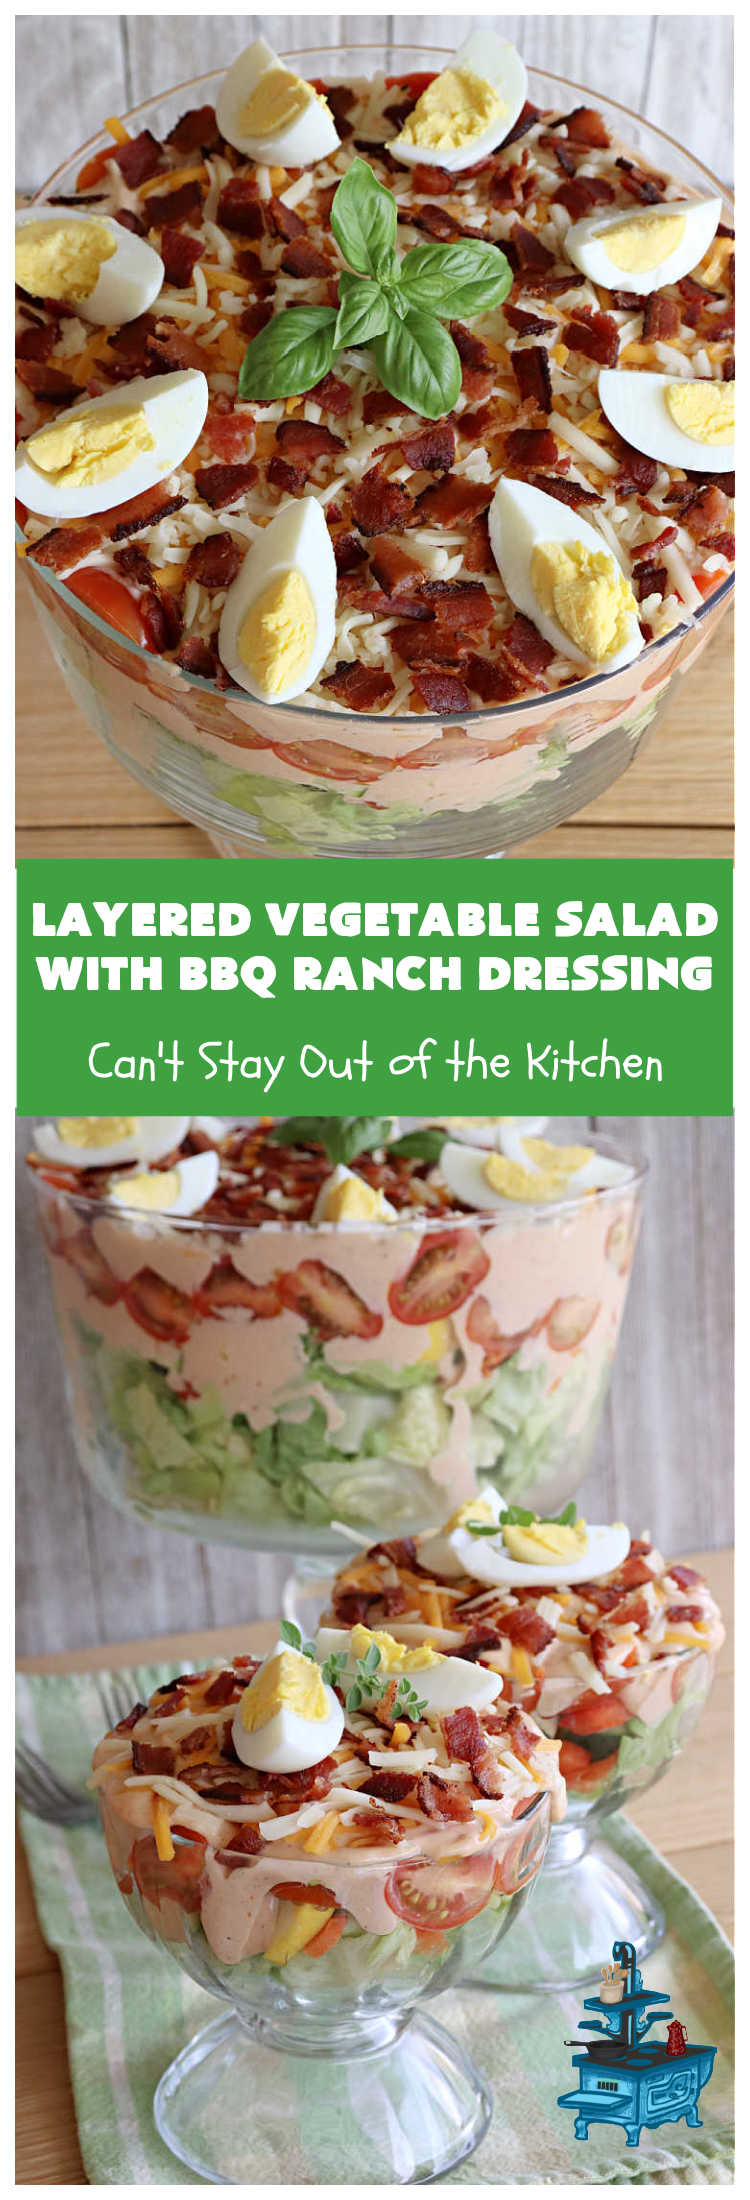 Layered Vegetable Salad with BBQ Ranch Dressing is spectacular! This amazing #salad uses all kinds of fresh #veggies, plus #bacon & two kinds of #cheese: #Cheddar & #MontereyJack. The #BBQRanchDressing is what gives the #recipe such amazing flavor. This #LayeredSalad is terrific for company or #holiday dinners & is #GlutenFree. #eggs #LayeredVegetableSaladWith BBQRanchDressing 